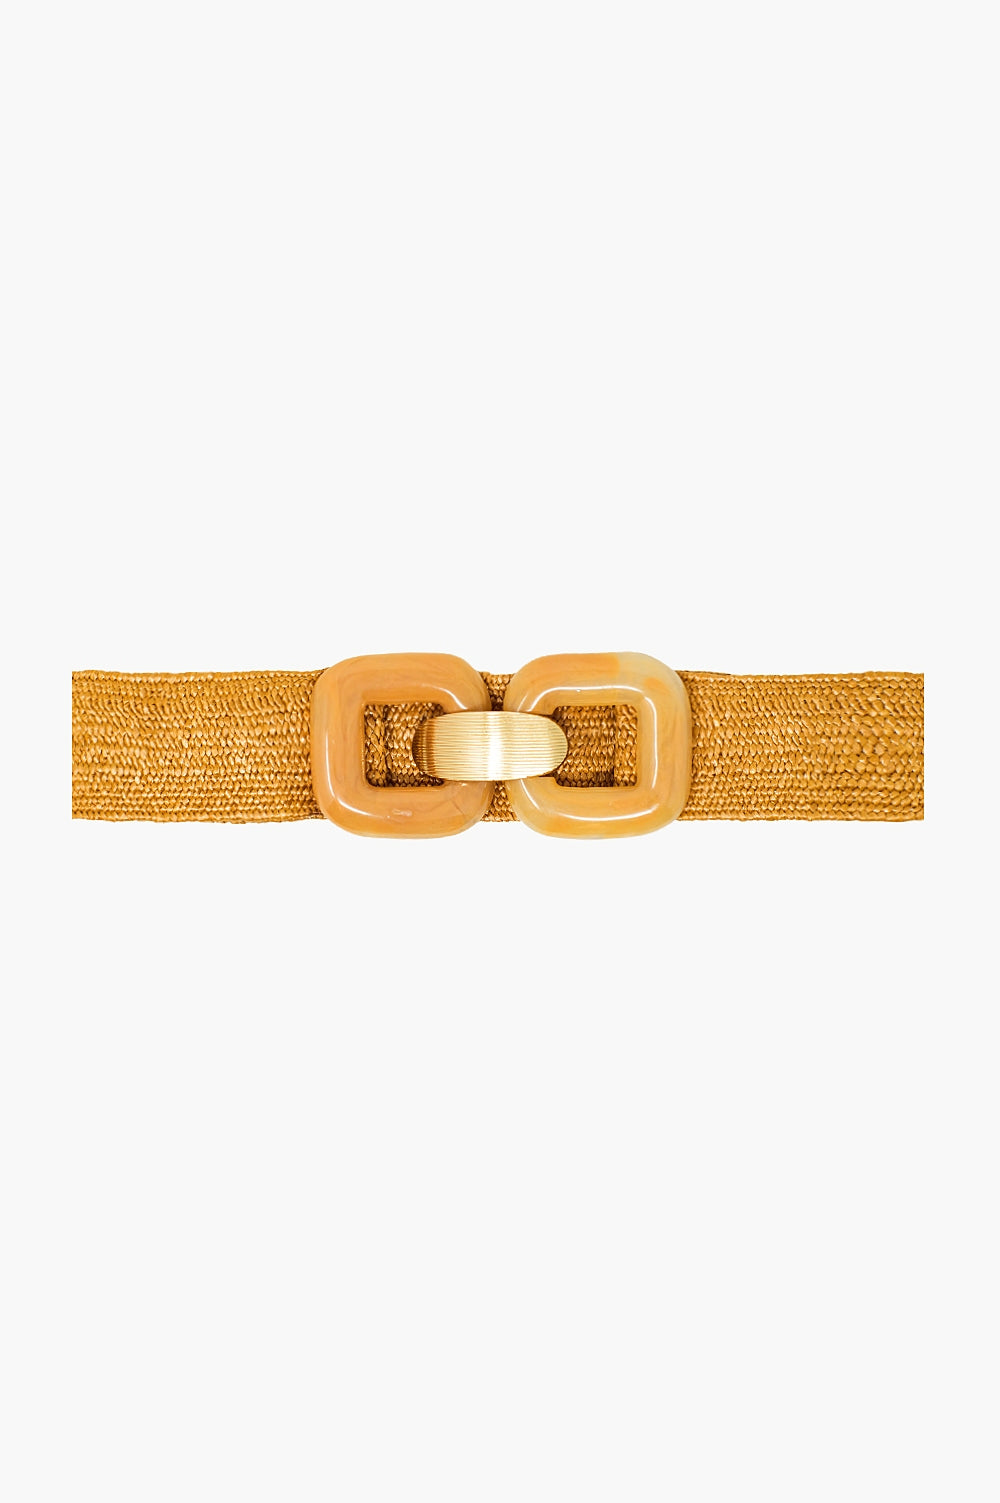 Q2 Woven belt with square buckles in beige